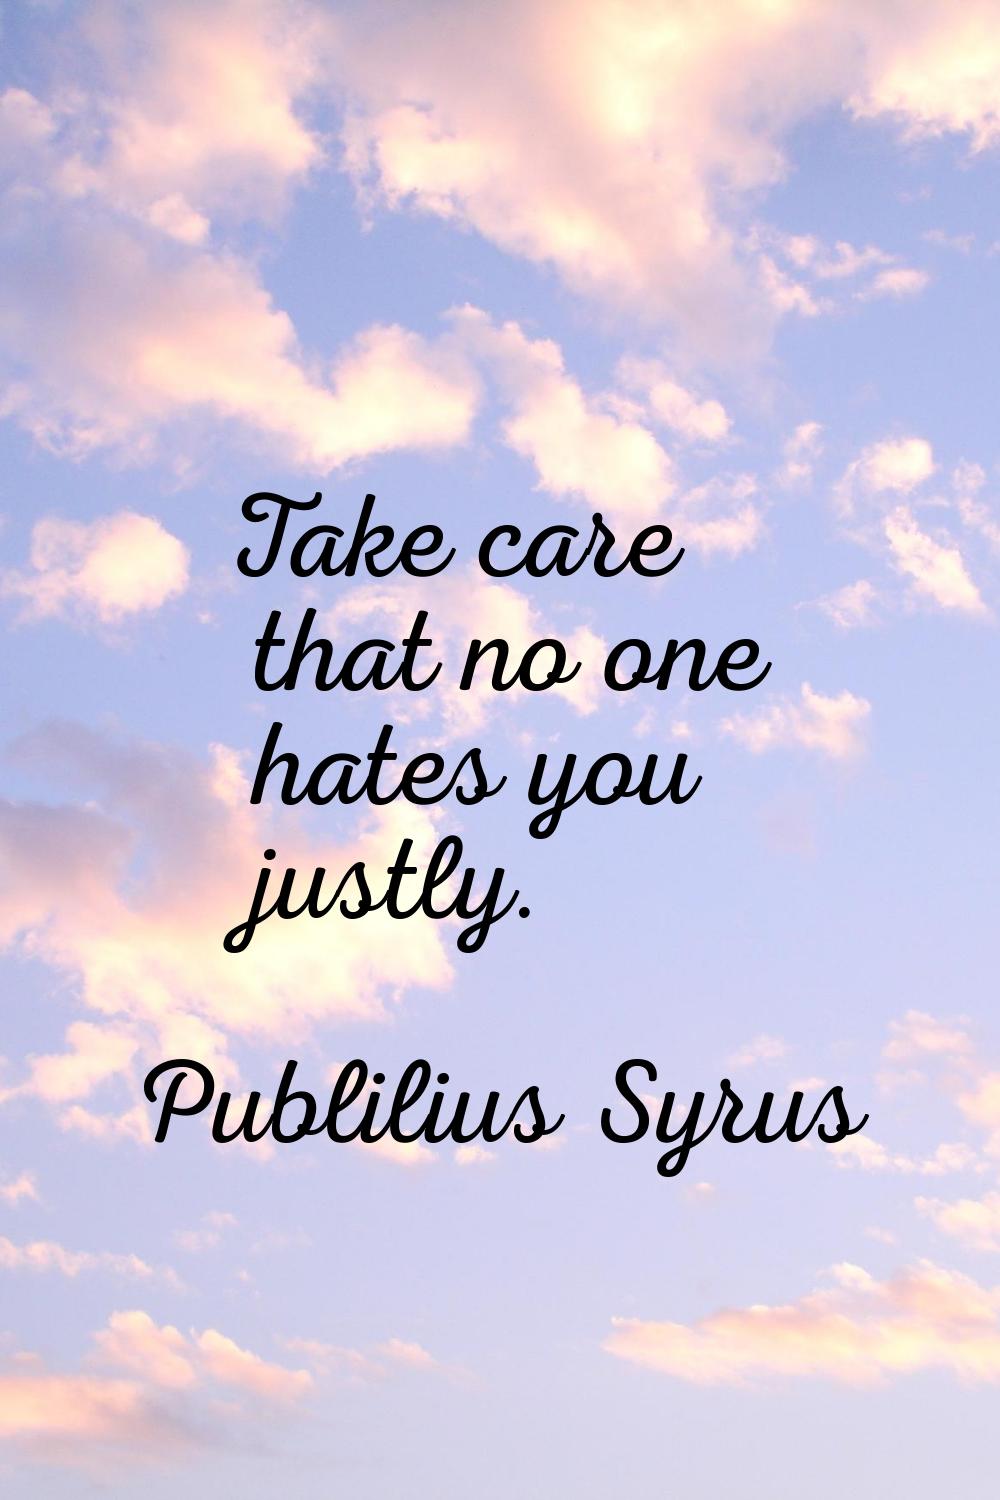 Take care that no one hates you justly.